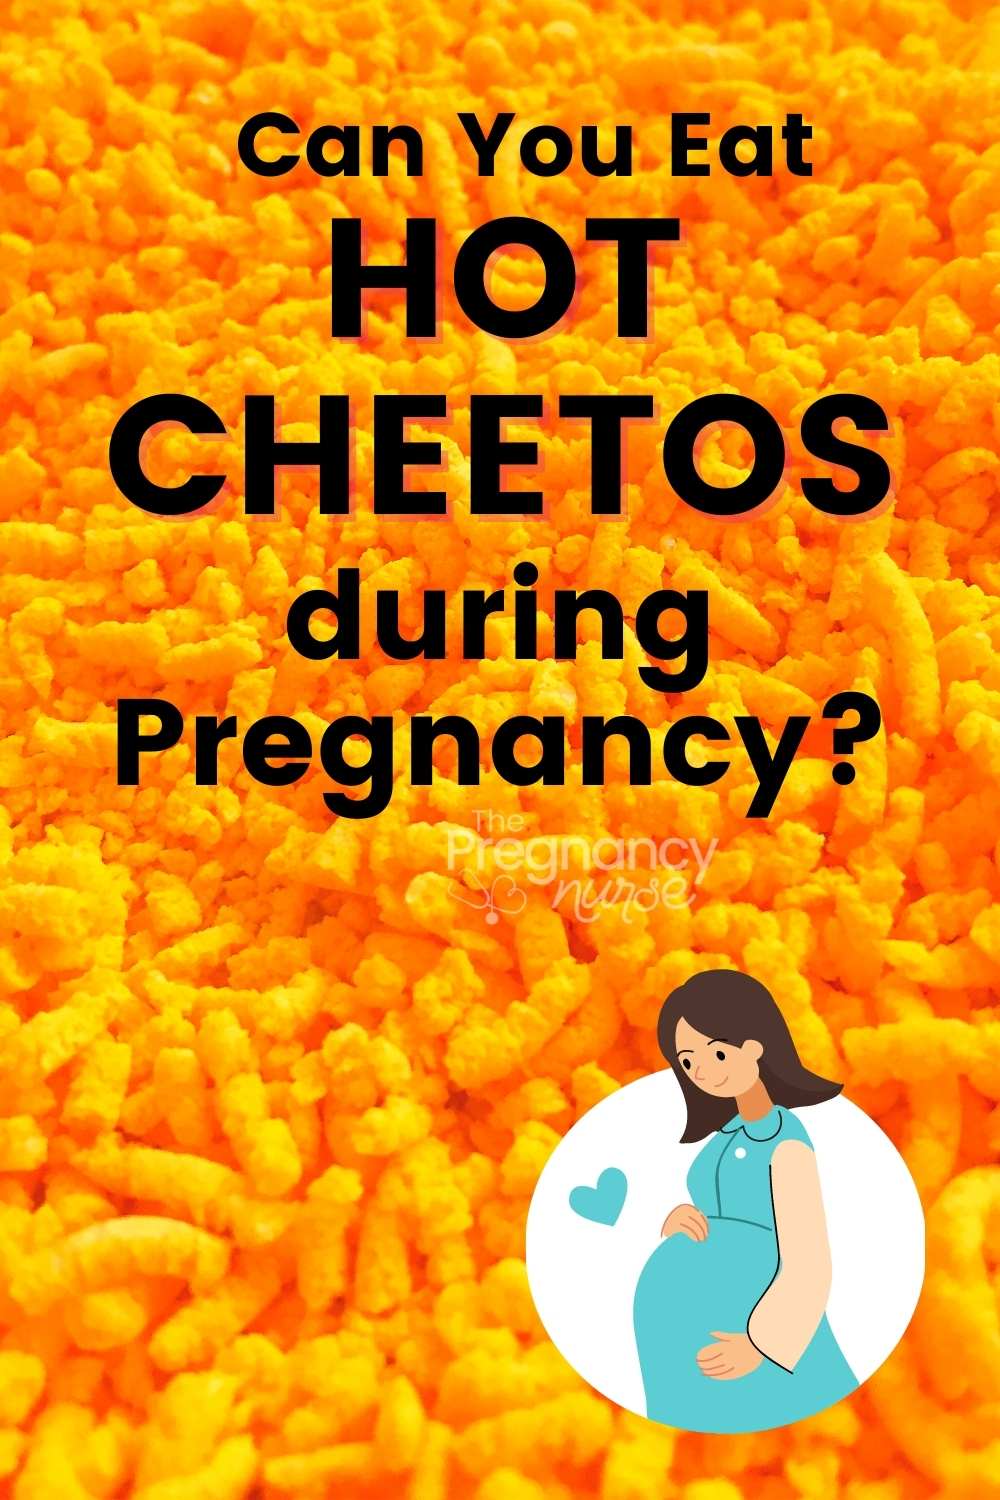 There are a lot of things you may consider giving up during pregnancy due to the risks involved. Are Cheetos one of those things? Don't worry, we have you covered! This prenatal class for couples will teach you everything you need to know about what foods are safe and unsafe to eat while pregnant. Enroll now and get started on your healthy pregnancy today!